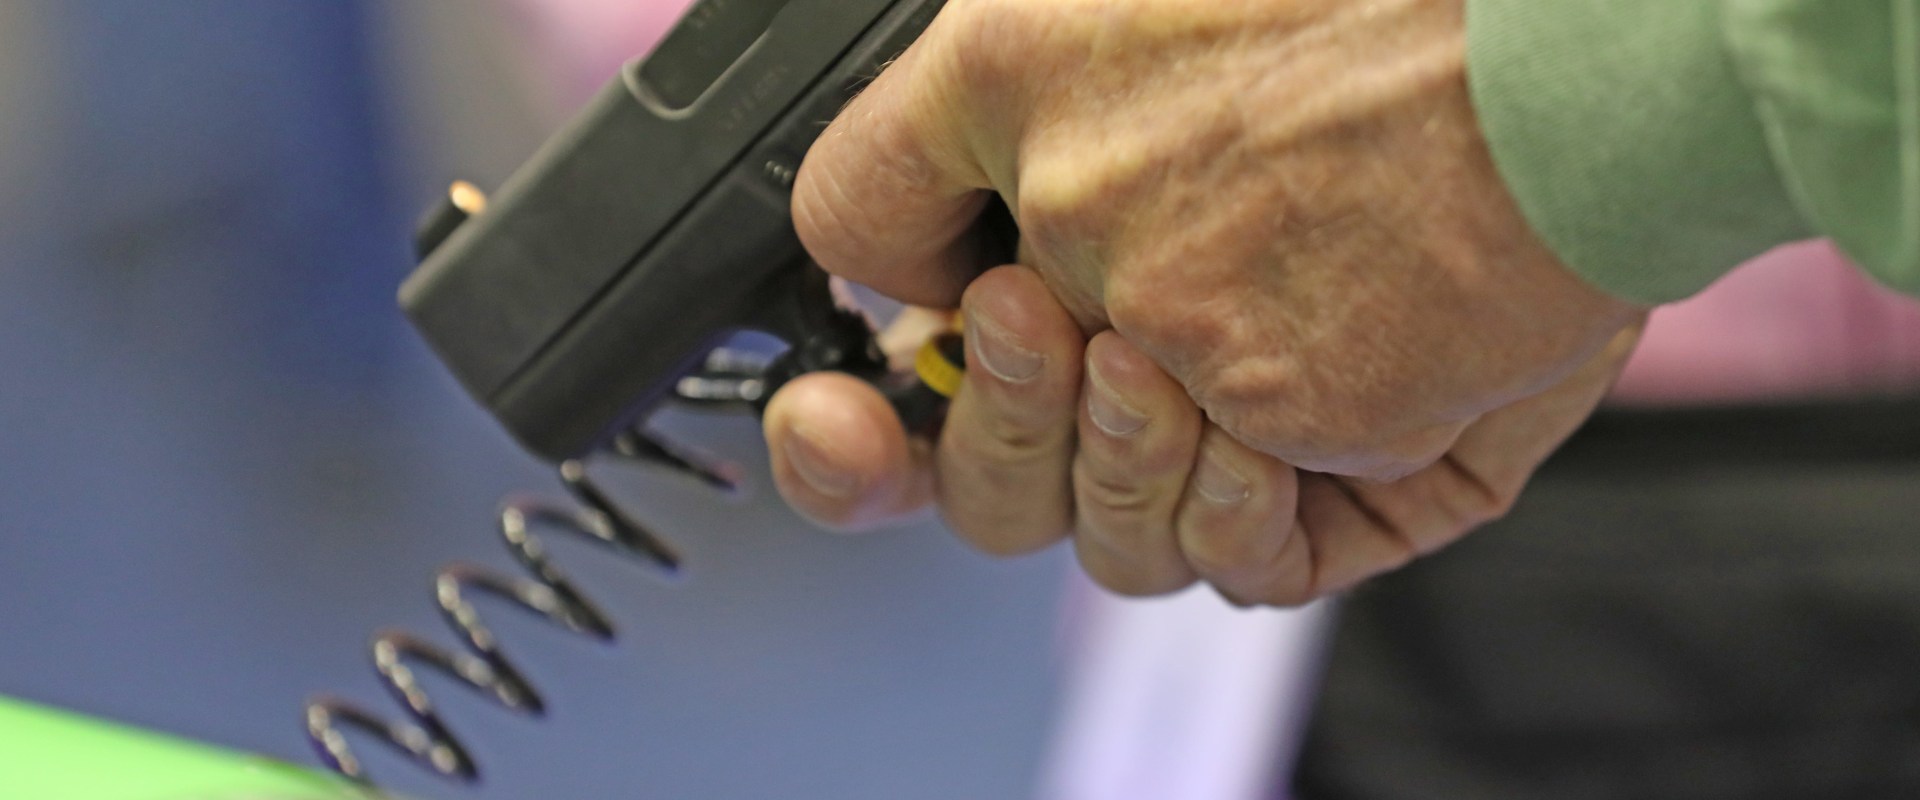 Carrying a Concealed Weapon in Indianapolis, Indiana: What You Need to Know